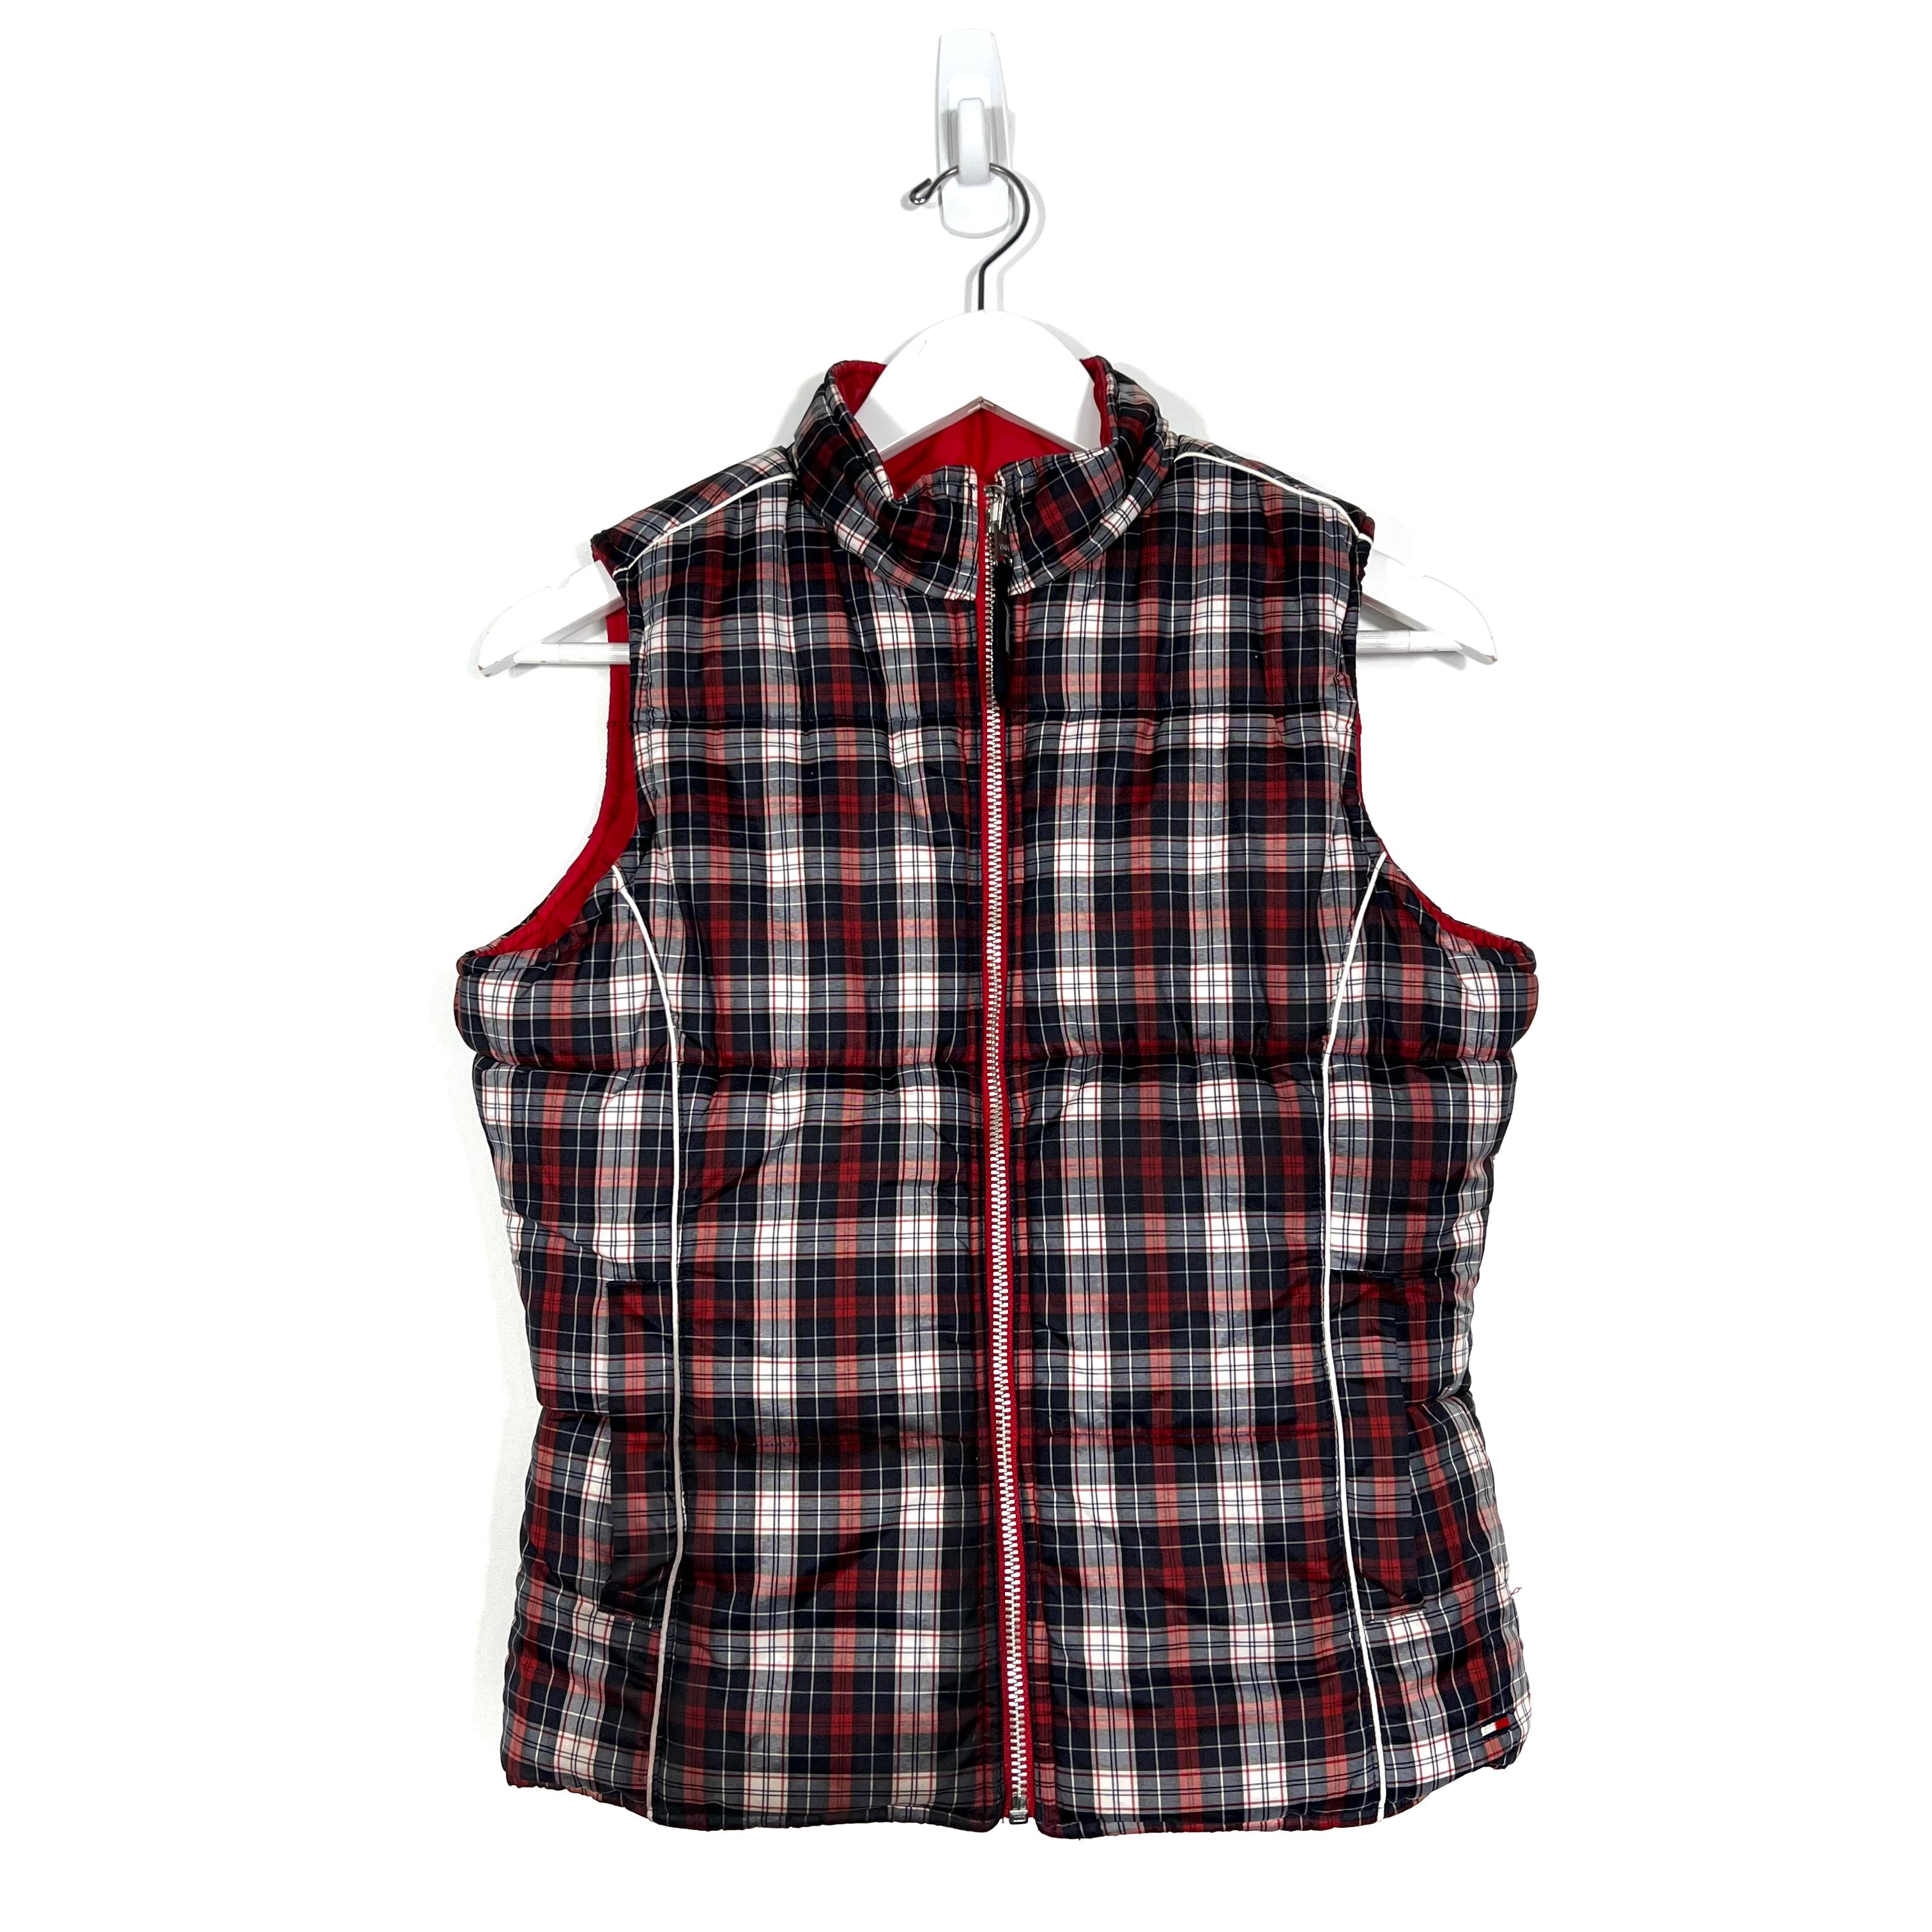 Tommy Hilfiger Reversible Insulated Vest - Women's XS